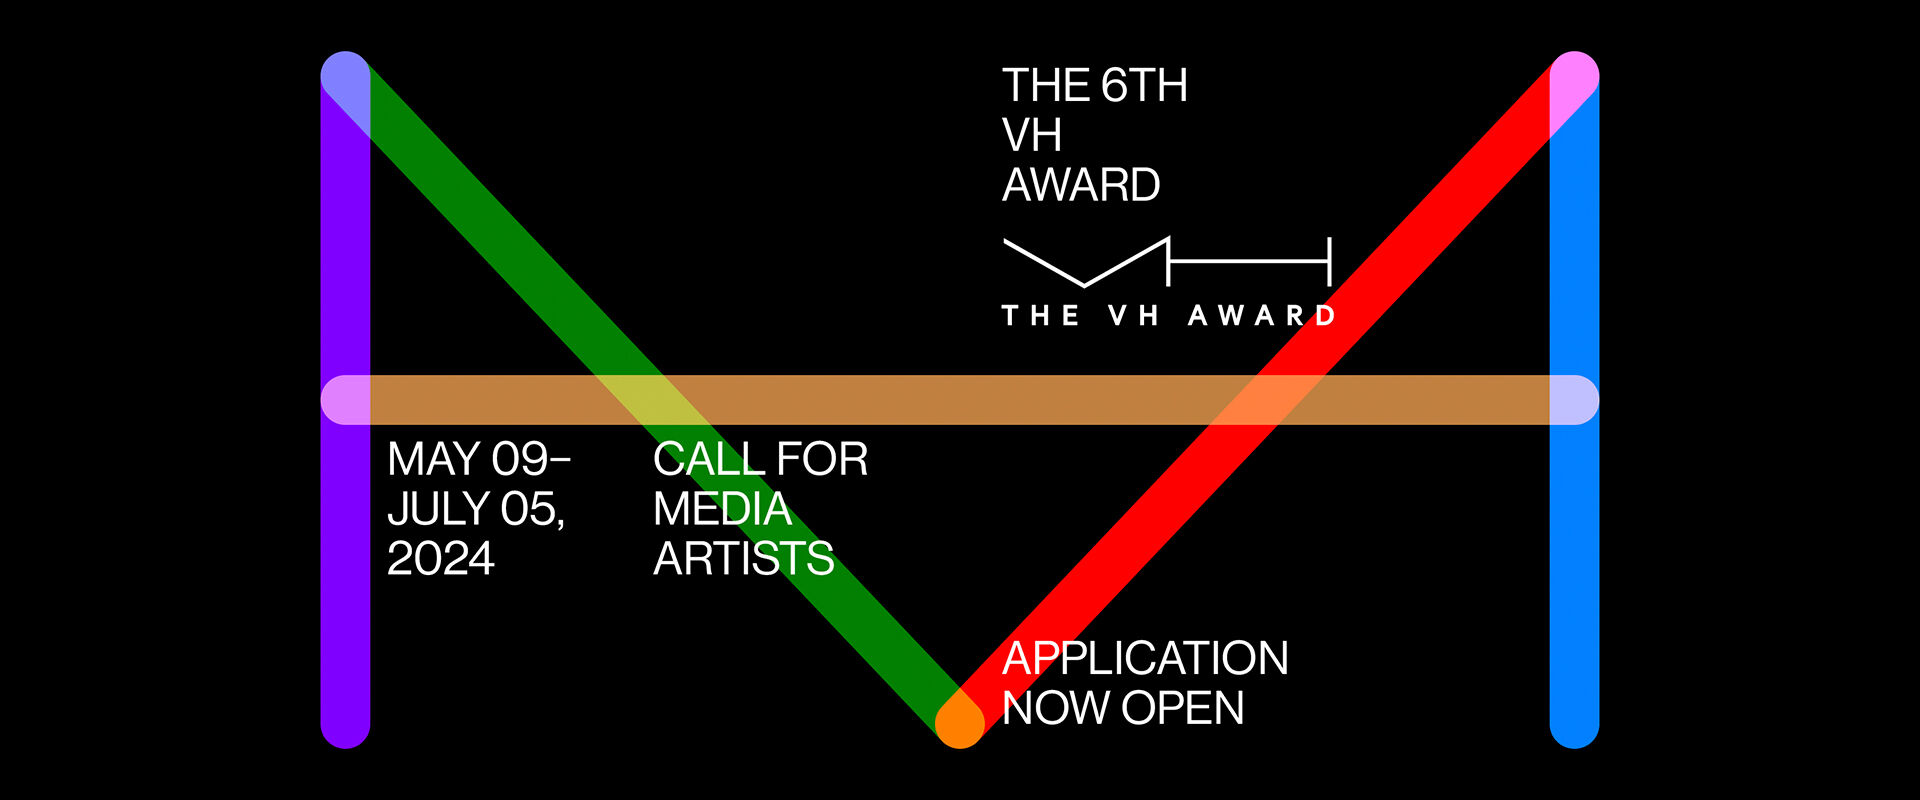 Hyundai Motor Group Invites Media Artists to Submit Audiovisual Artworks for the 6th VH AWARD